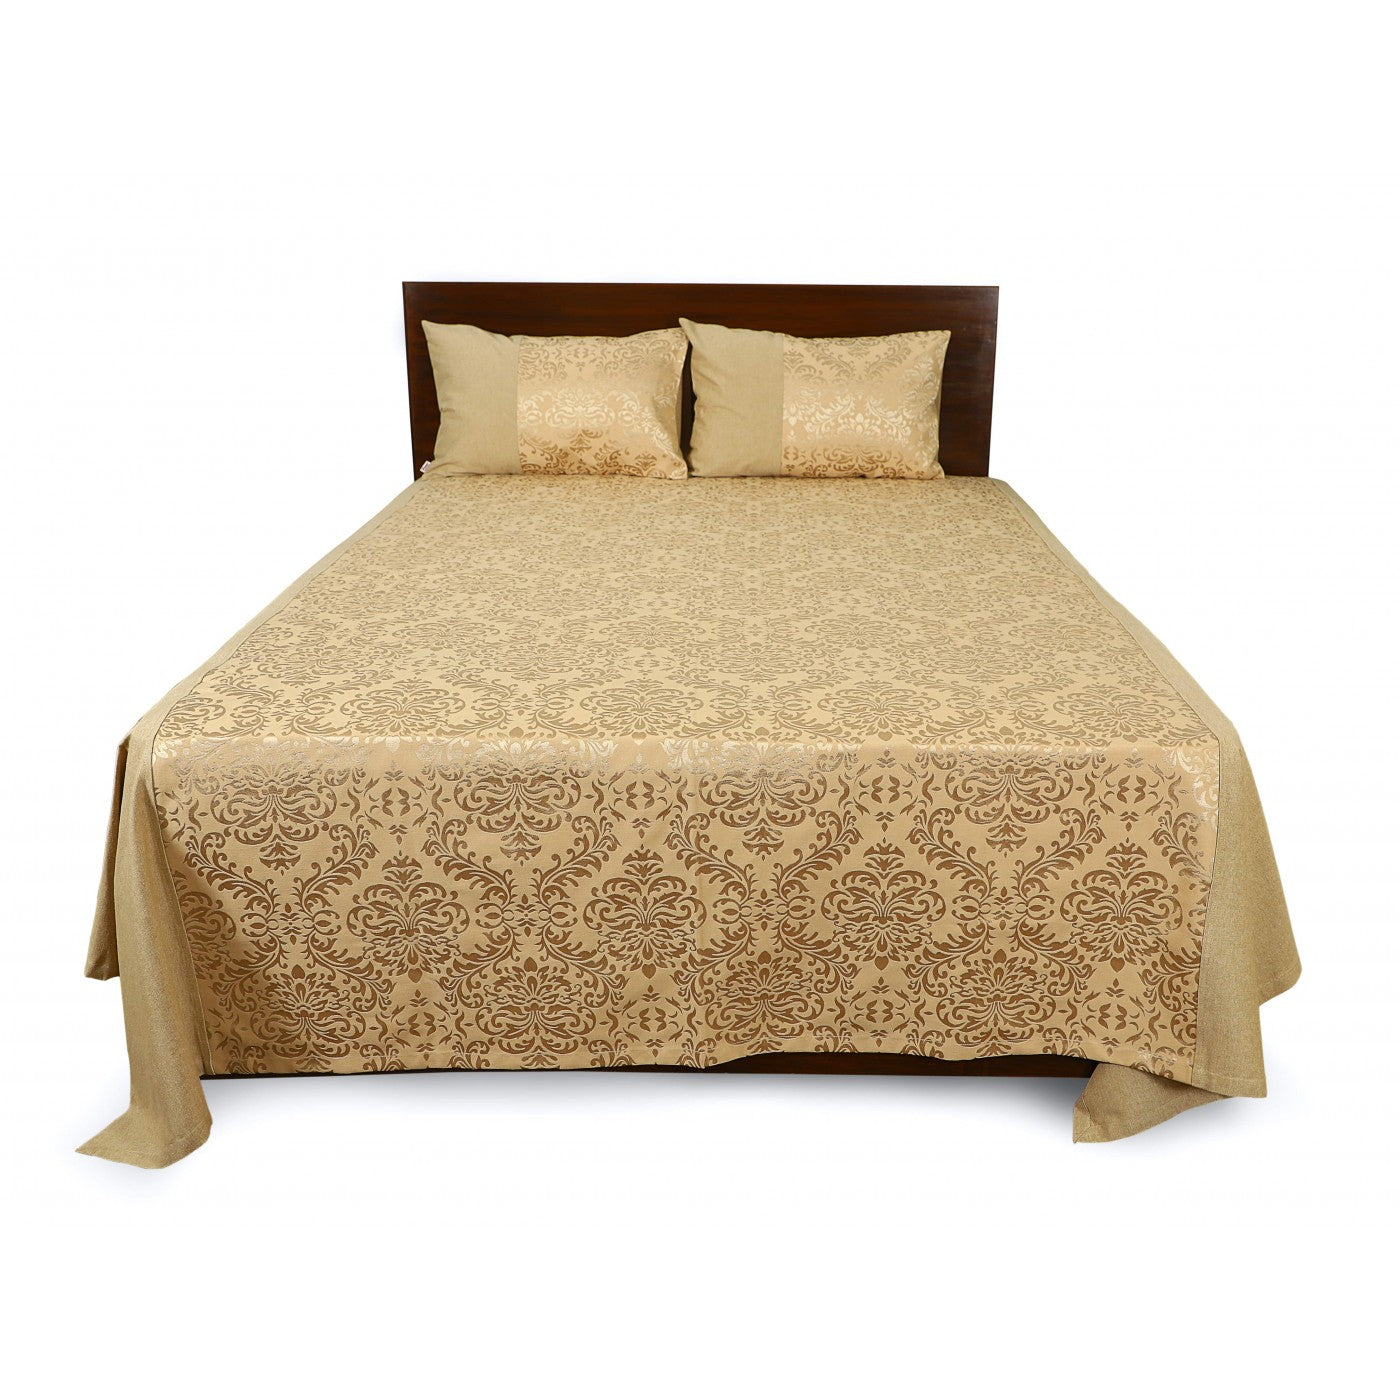 Elegance Damask Cotton Jacquard Bed Cover Set with Matching Pillow Covers